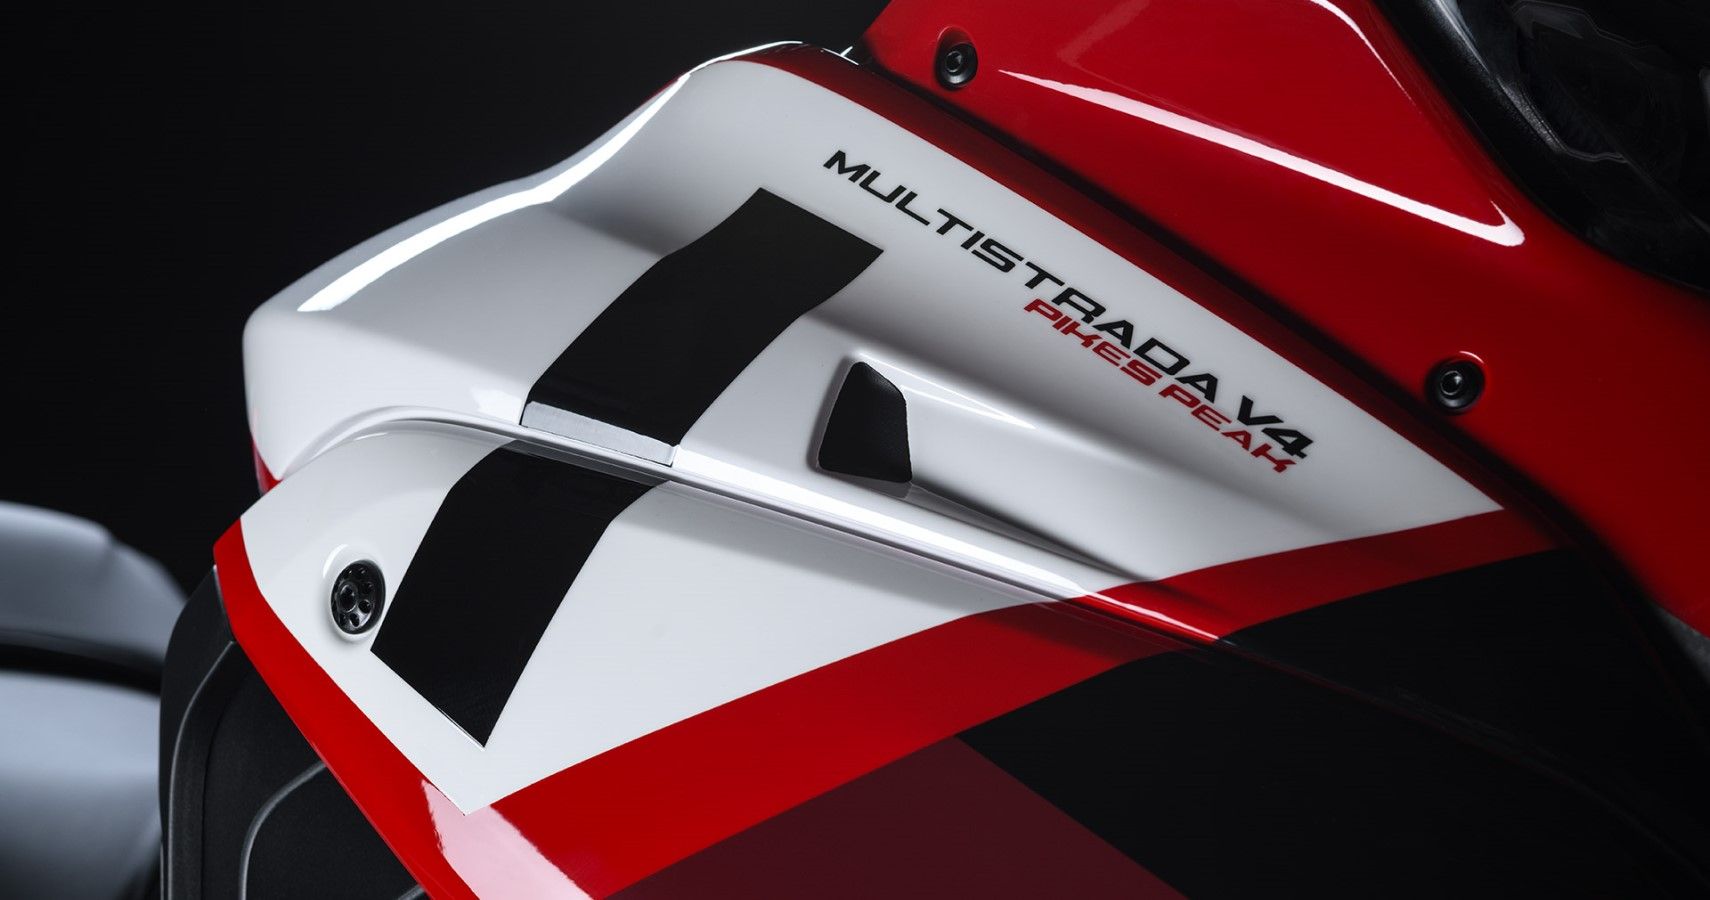 2022 Ducati Multistrada V4 Pikes Peak front cowling close-up view